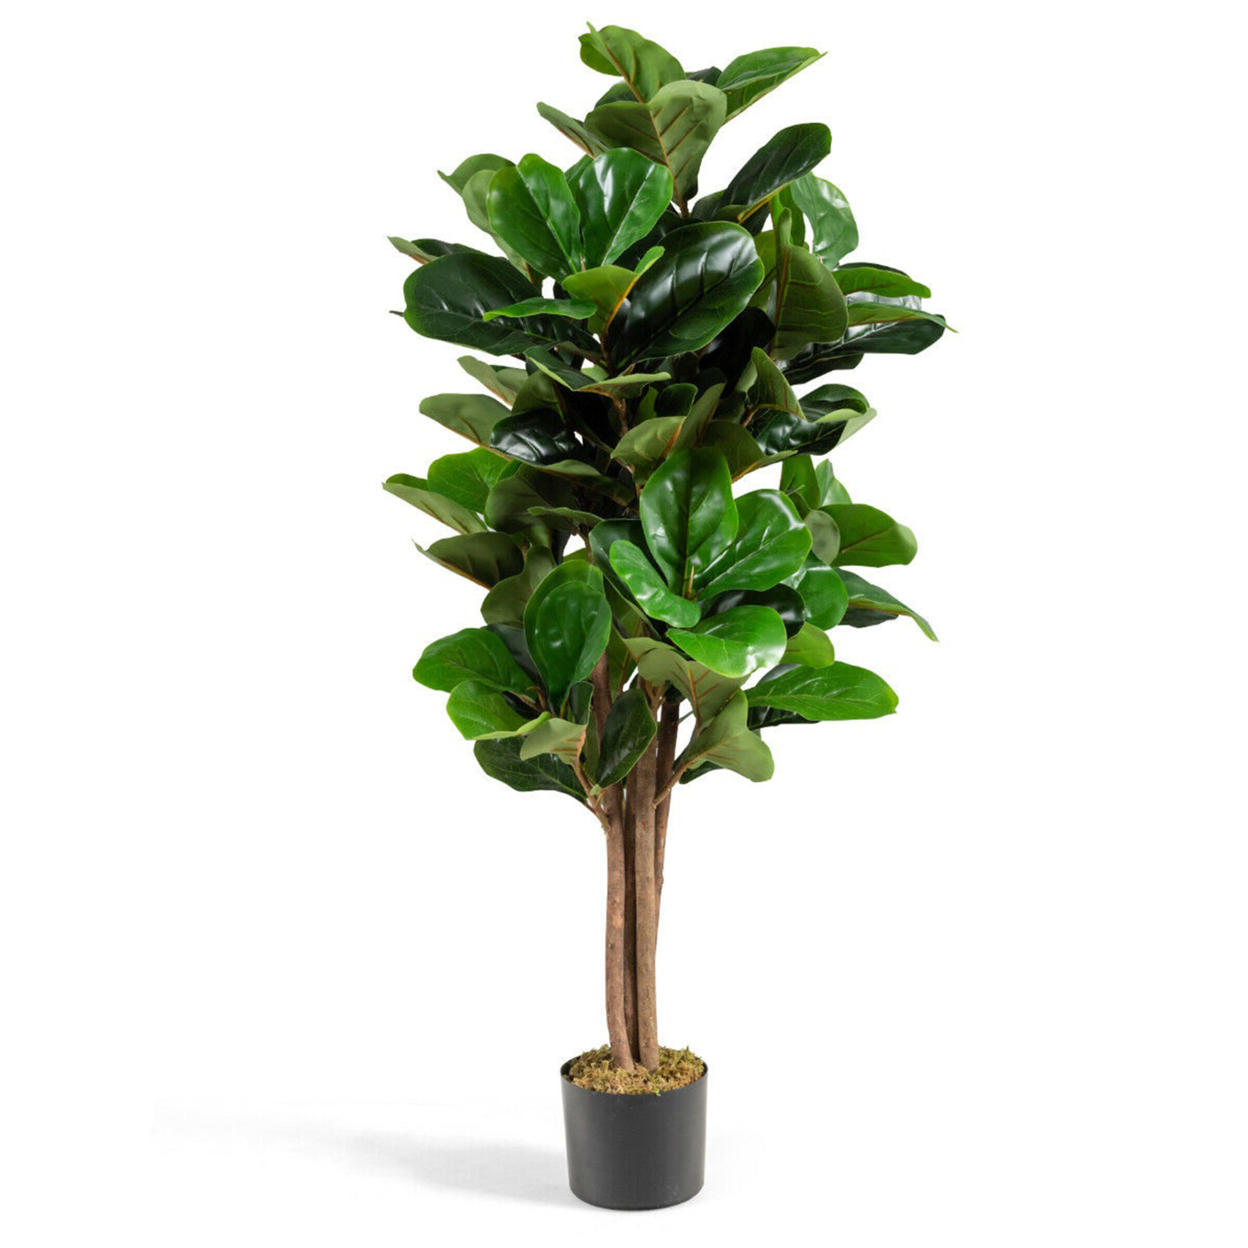 5Ft Fiddle Leaf Fig Tree Artificial Greenery Plant Home Office Decoration